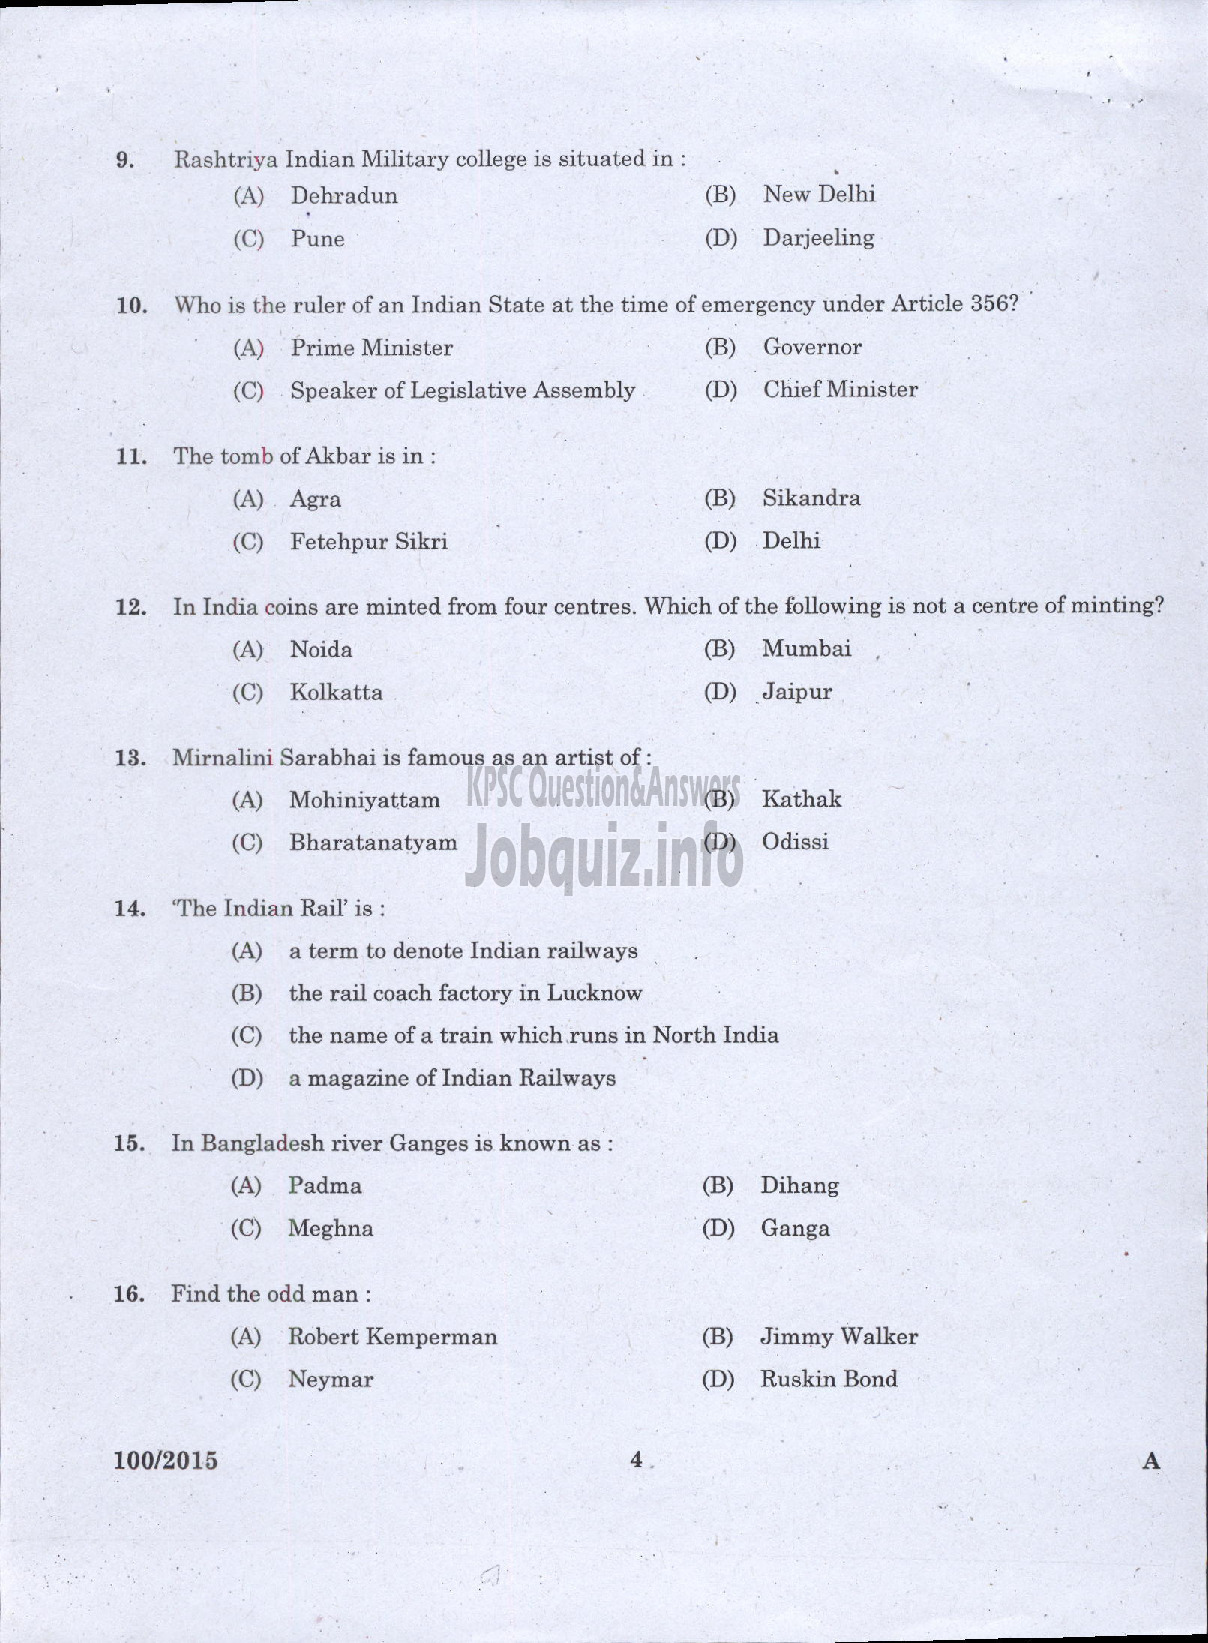 Kerala PSC Question Paper - TYYPIST GRADE II / STENO TYPIST / CLERK TYPIST / TYPIST KERALA STATE HOUSING BOARD / KERALA SHIPPING AND INLAND NAVIGATION CORP LTD / VARIOUS / KERALA ELECTRICAL AND ALLIED ENGINEERING COMPANY LTD-2